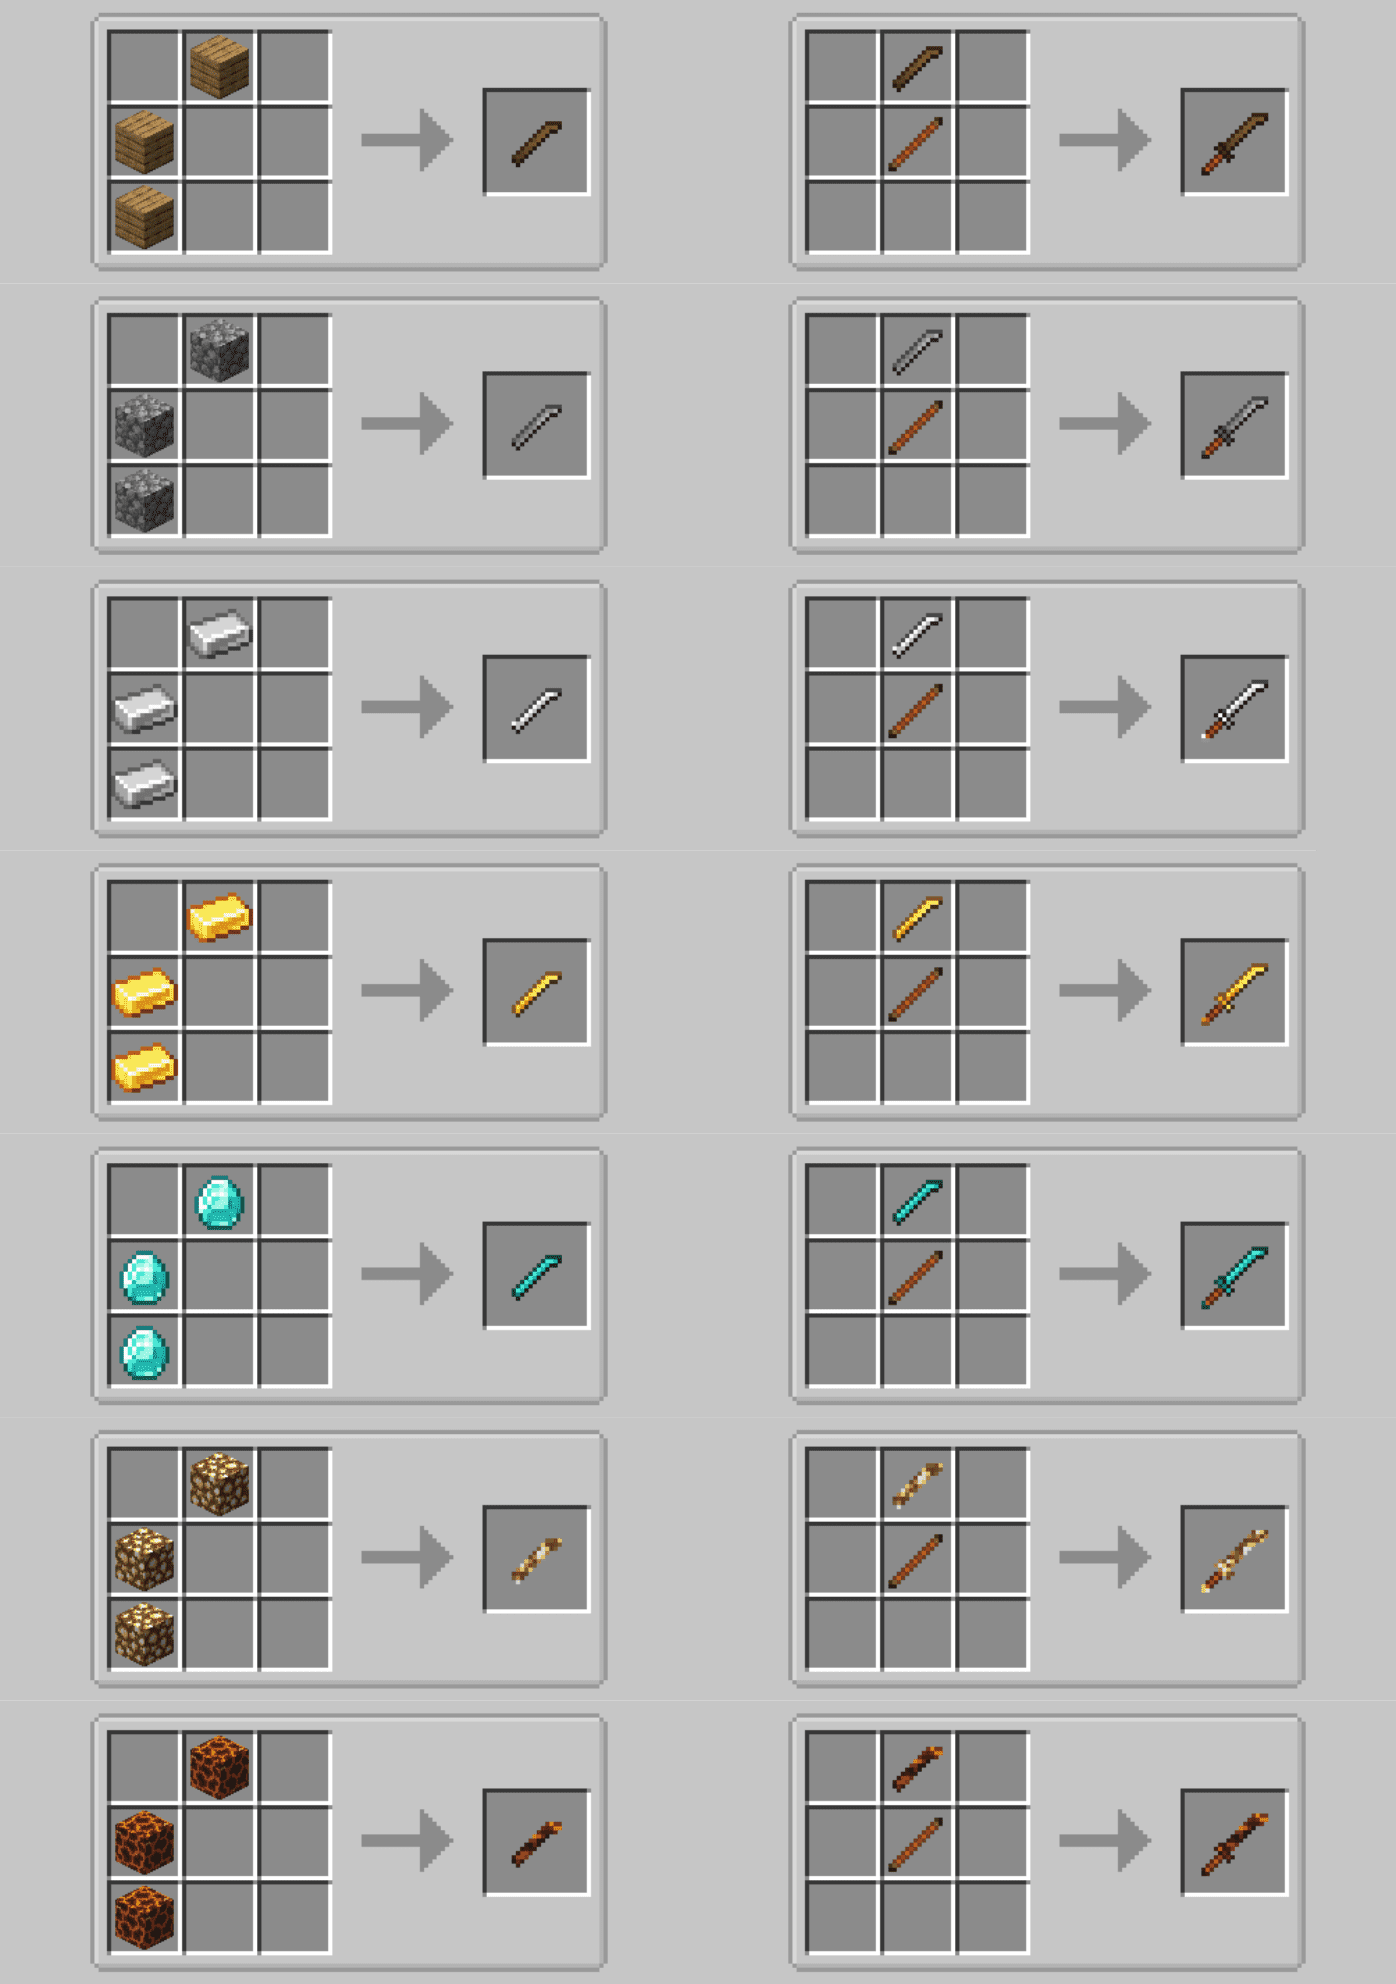 Caves and Katanas Mod (1.20.1, 1.19.2) - New Weapon Class 2